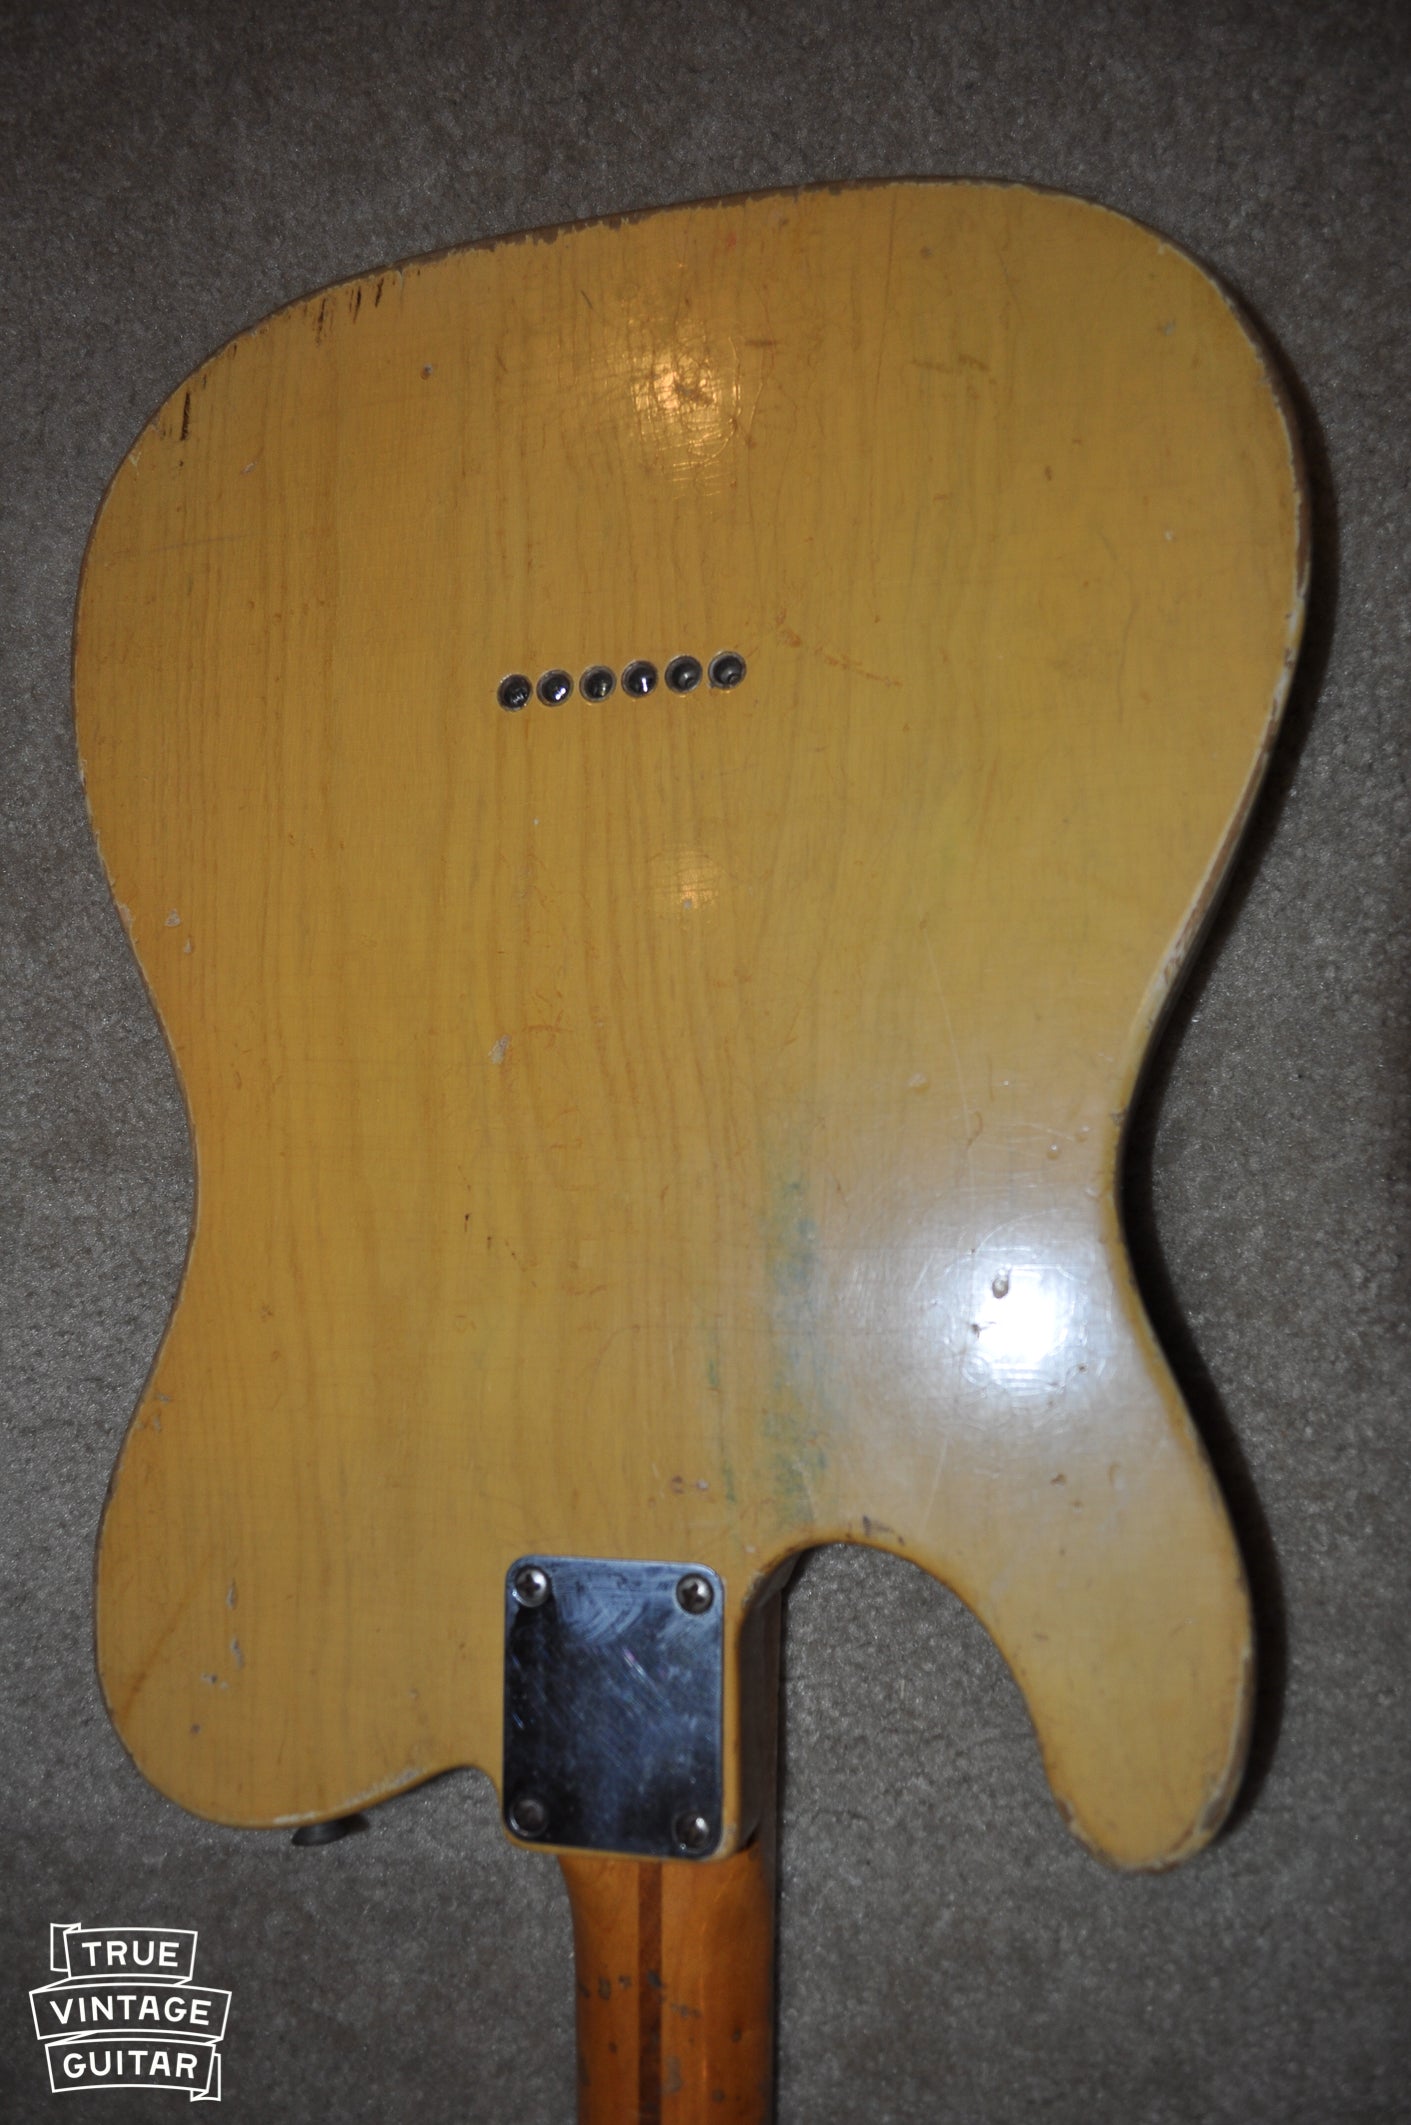 Fender Telecaster 1952 back of the body Blond yellow finish